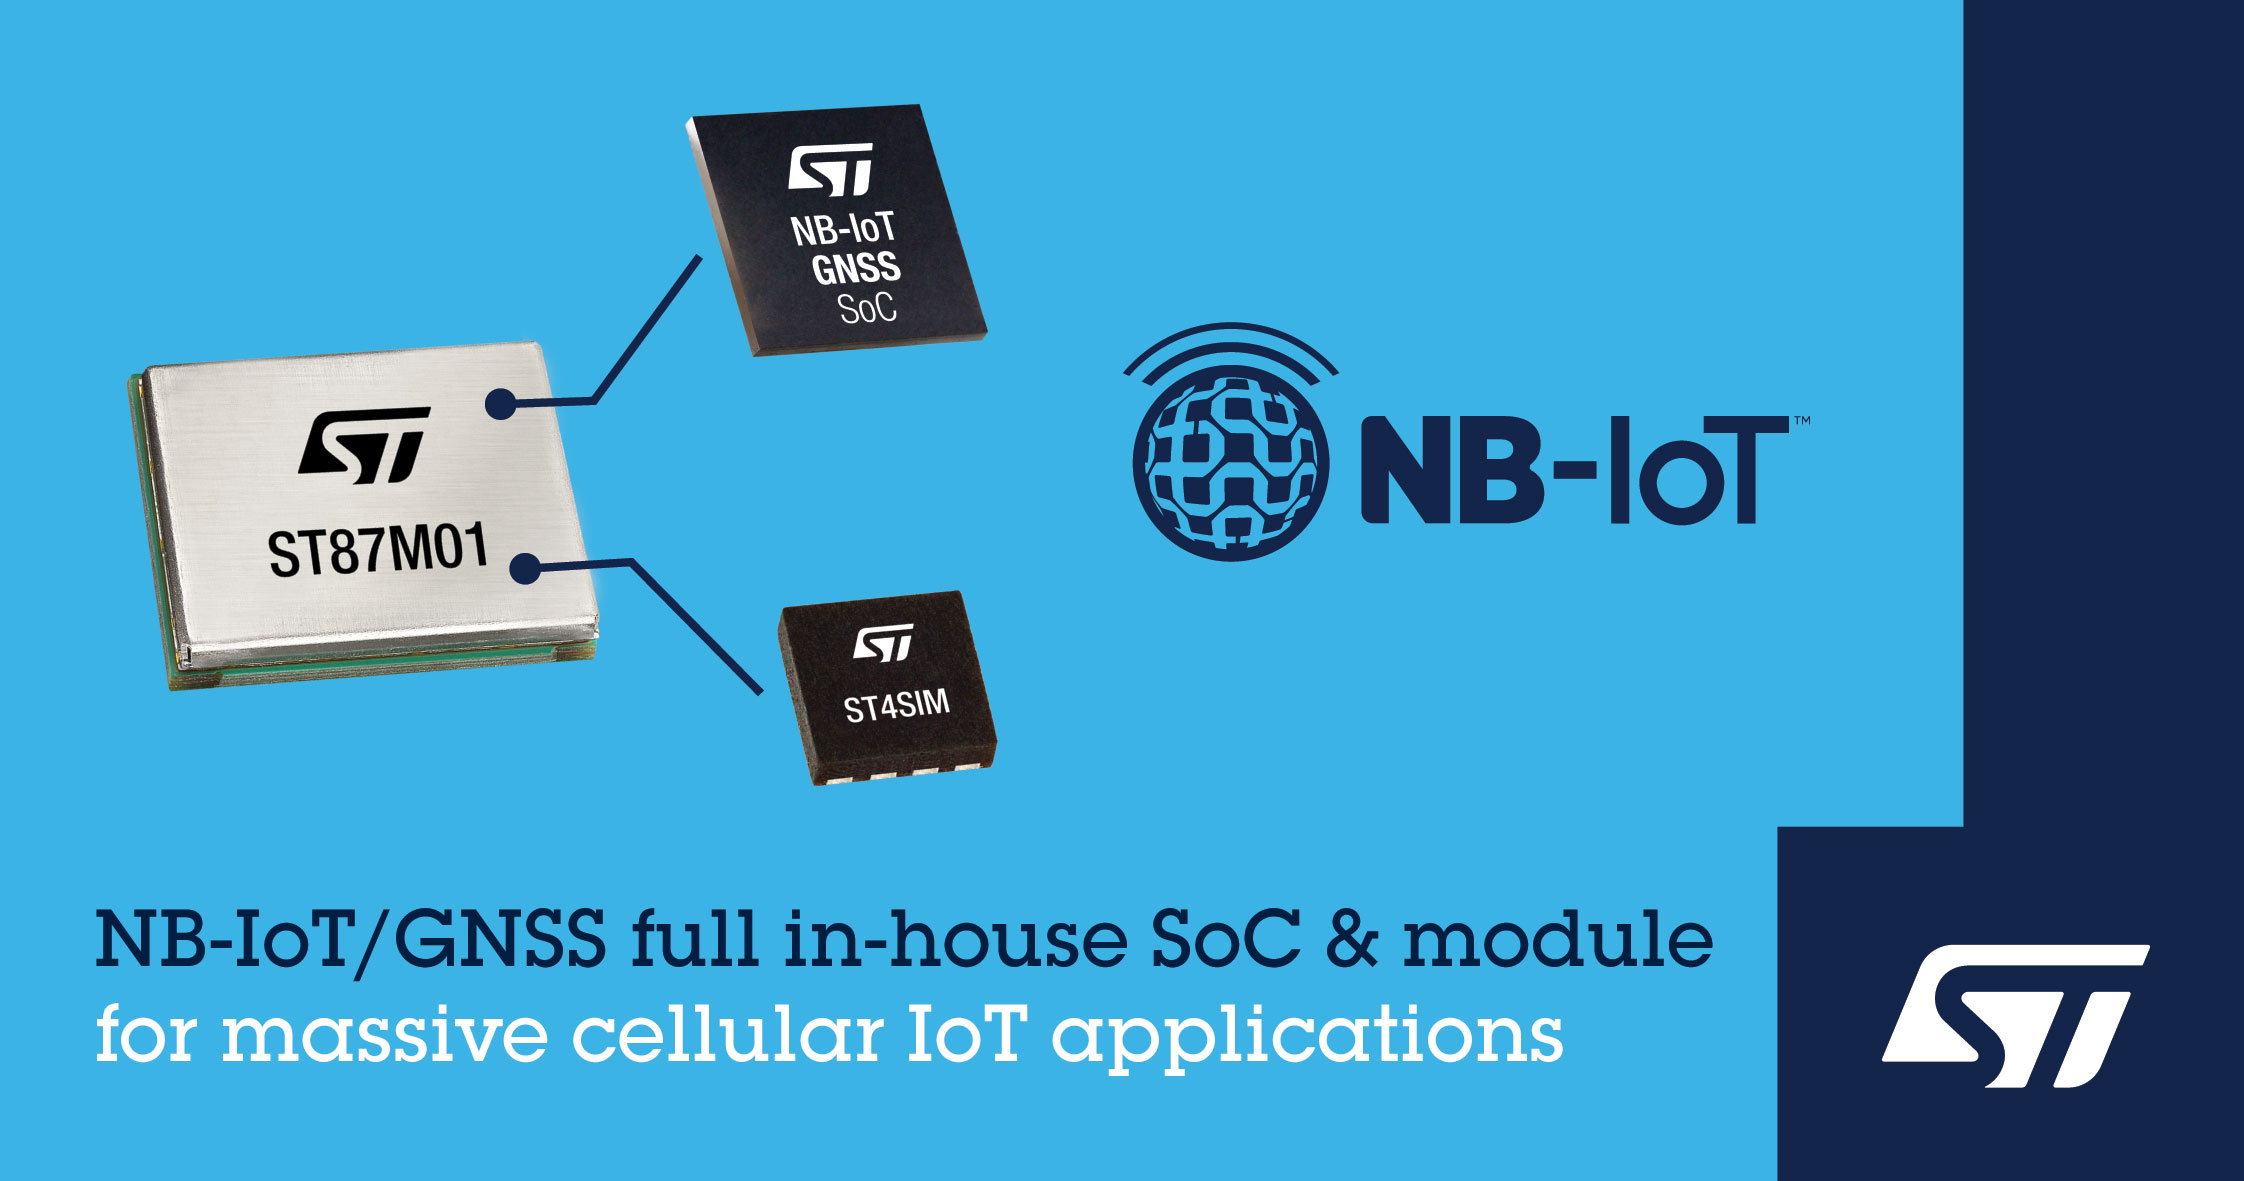 STMicroelectronics unveils NB-IoT modules with GNSS and geo-location capability